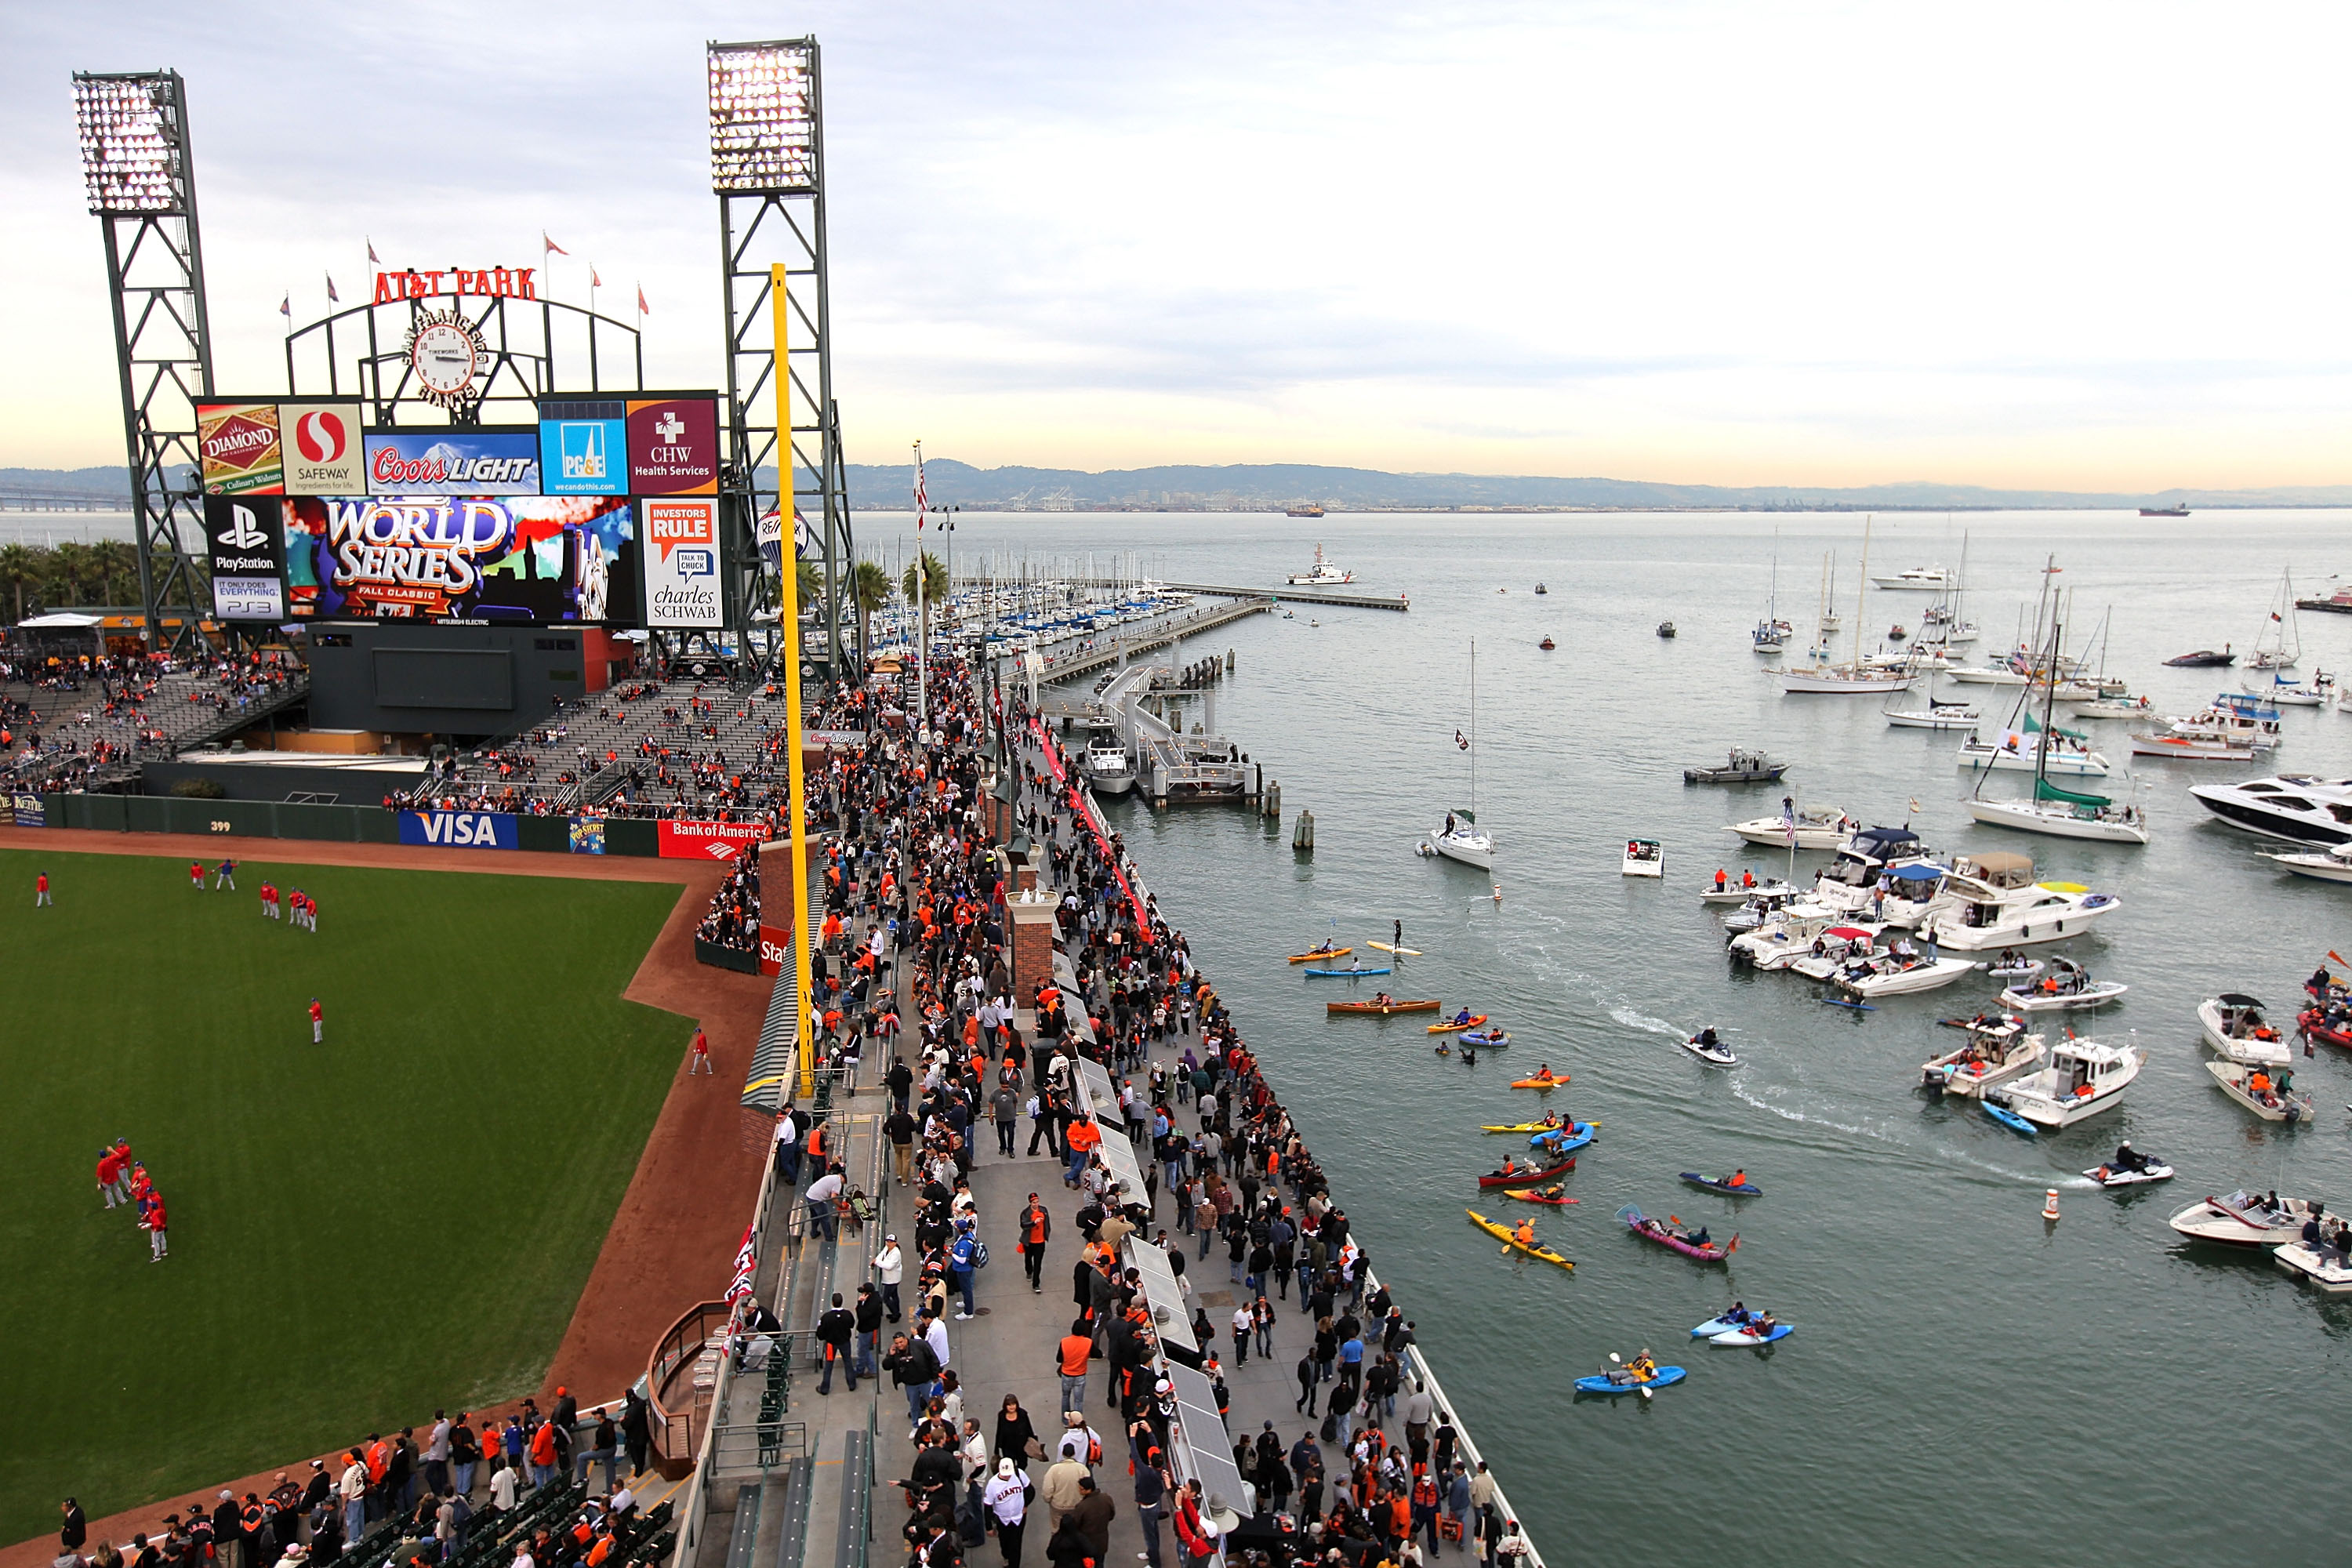 SAN FRANCISCO - OCTOBER 27:  Boaters and fans congregate in McCovey Cove outside of AT&T Park prior to Game One of the 2010 MLB World Series between the Texas Rangers and the San Francisco Giants on October 27, 2010 in San Francisco, California.  (Photo b